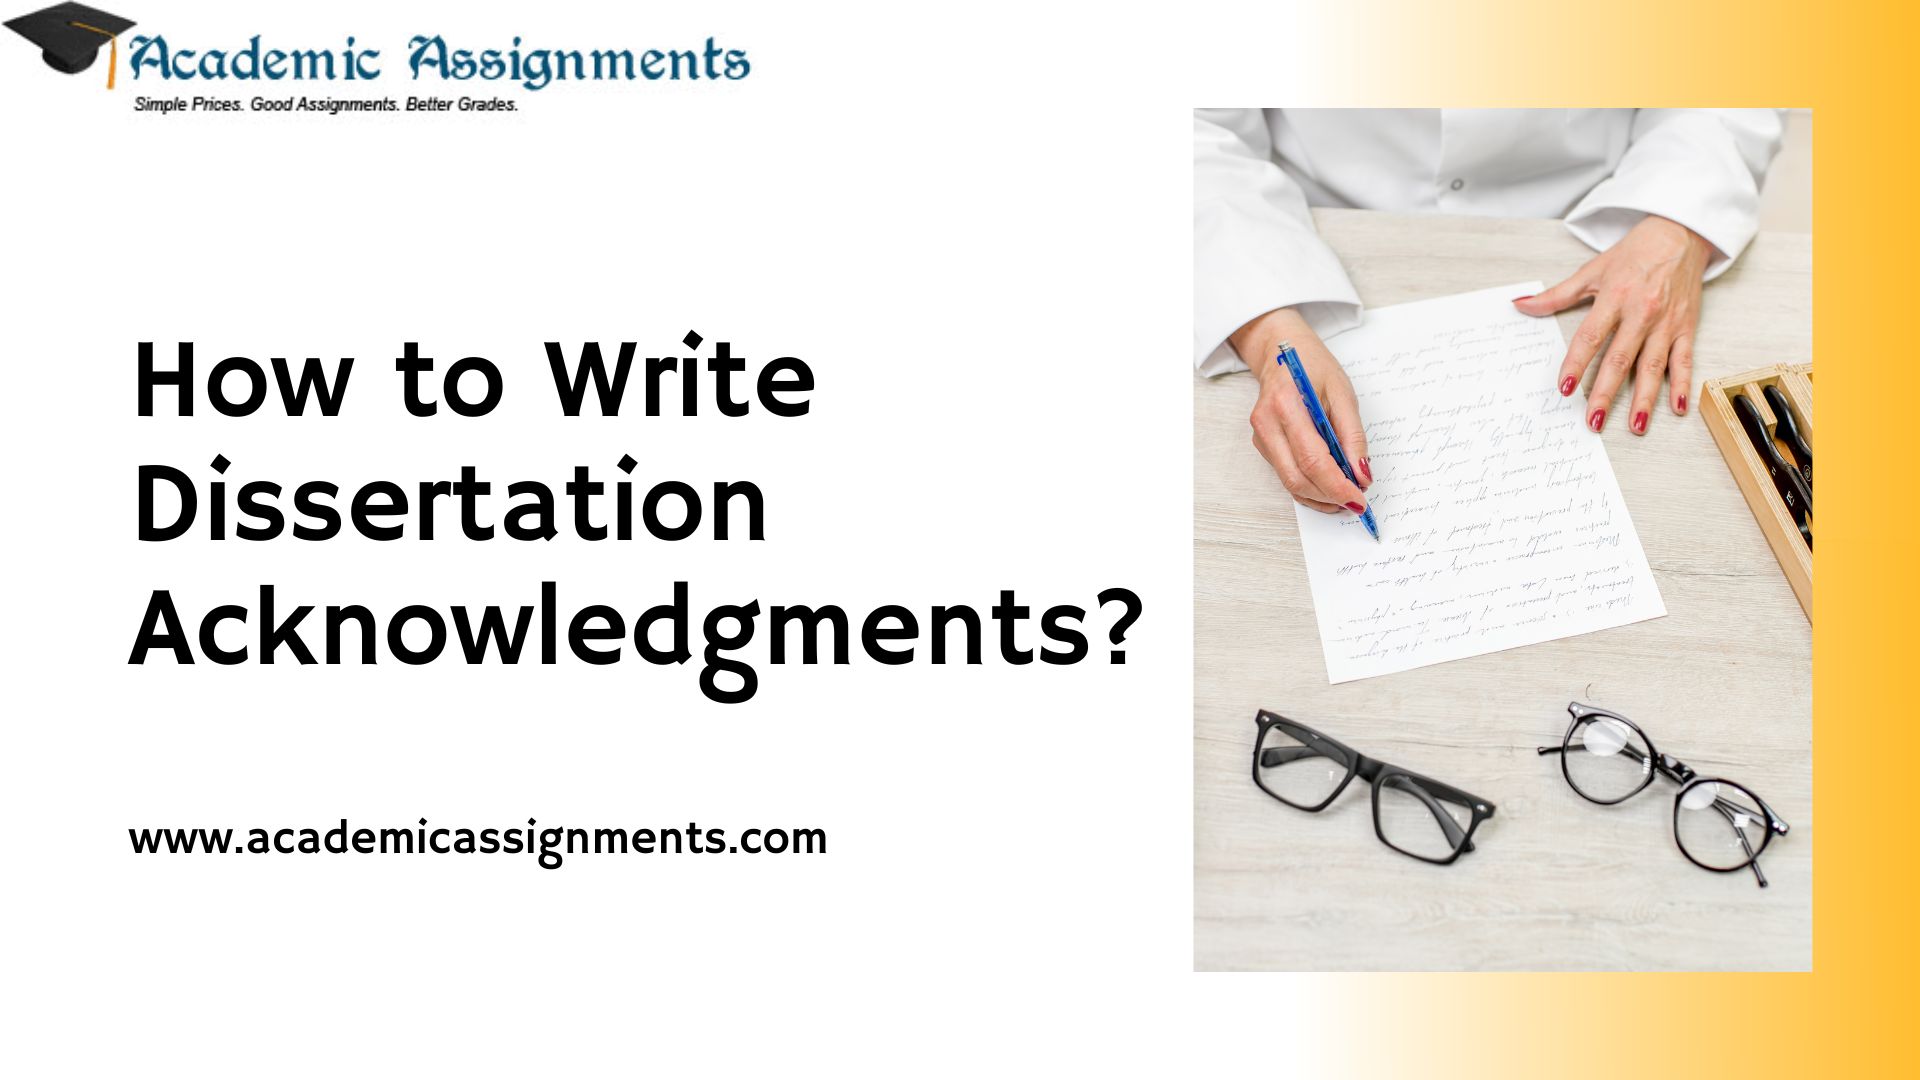 How to Write Dissertation Acknowledgments